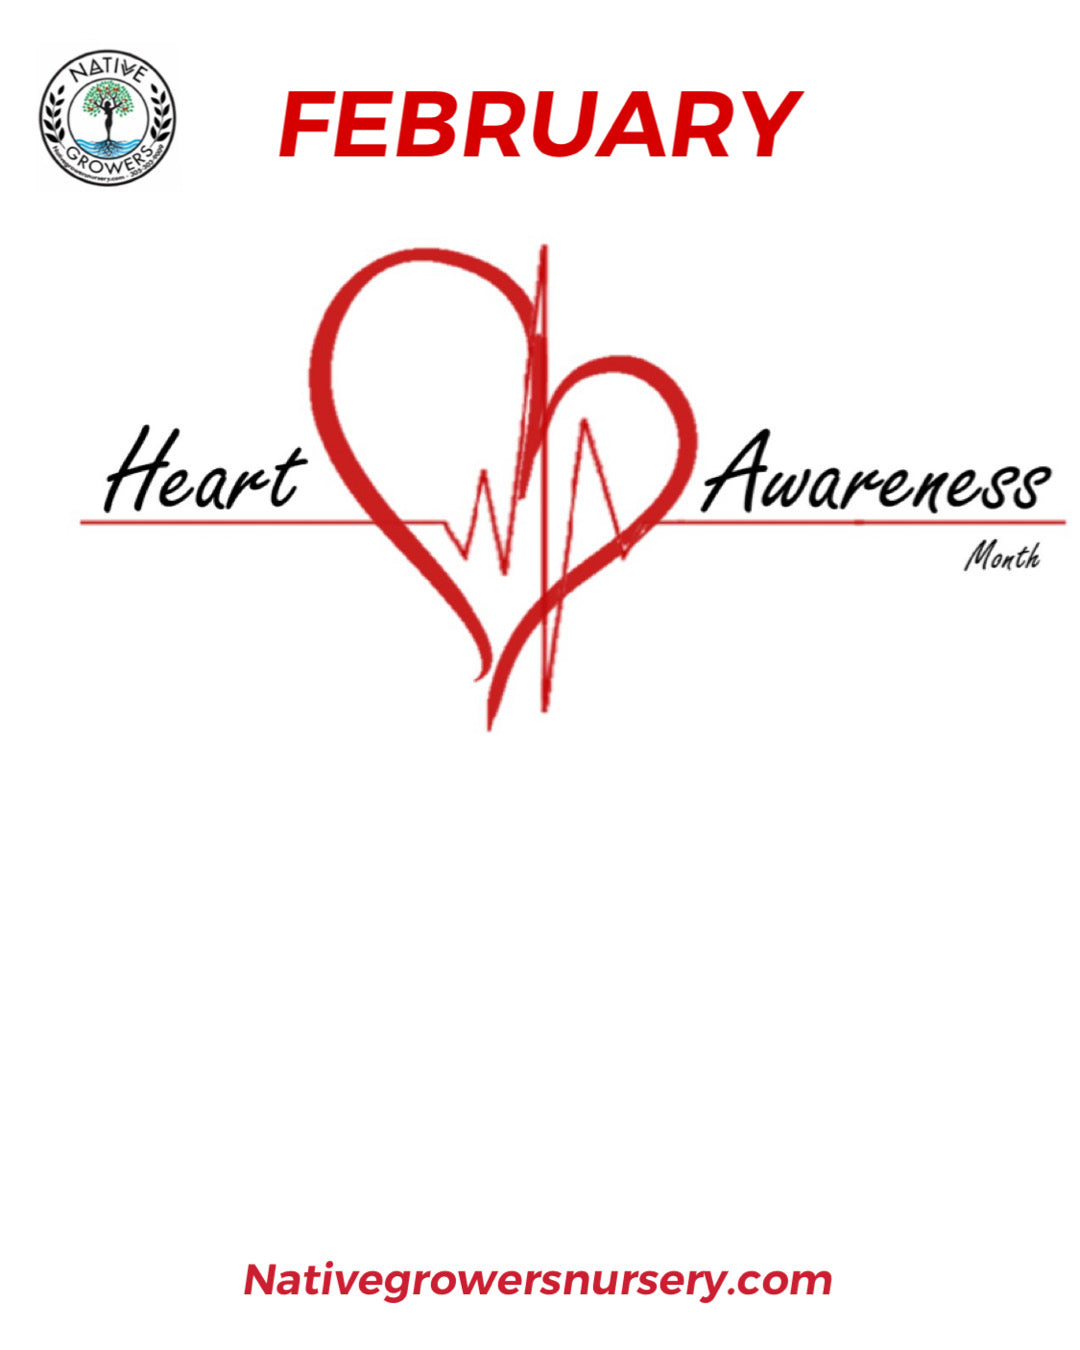 February is Heart Health Month! Feed your Heart!